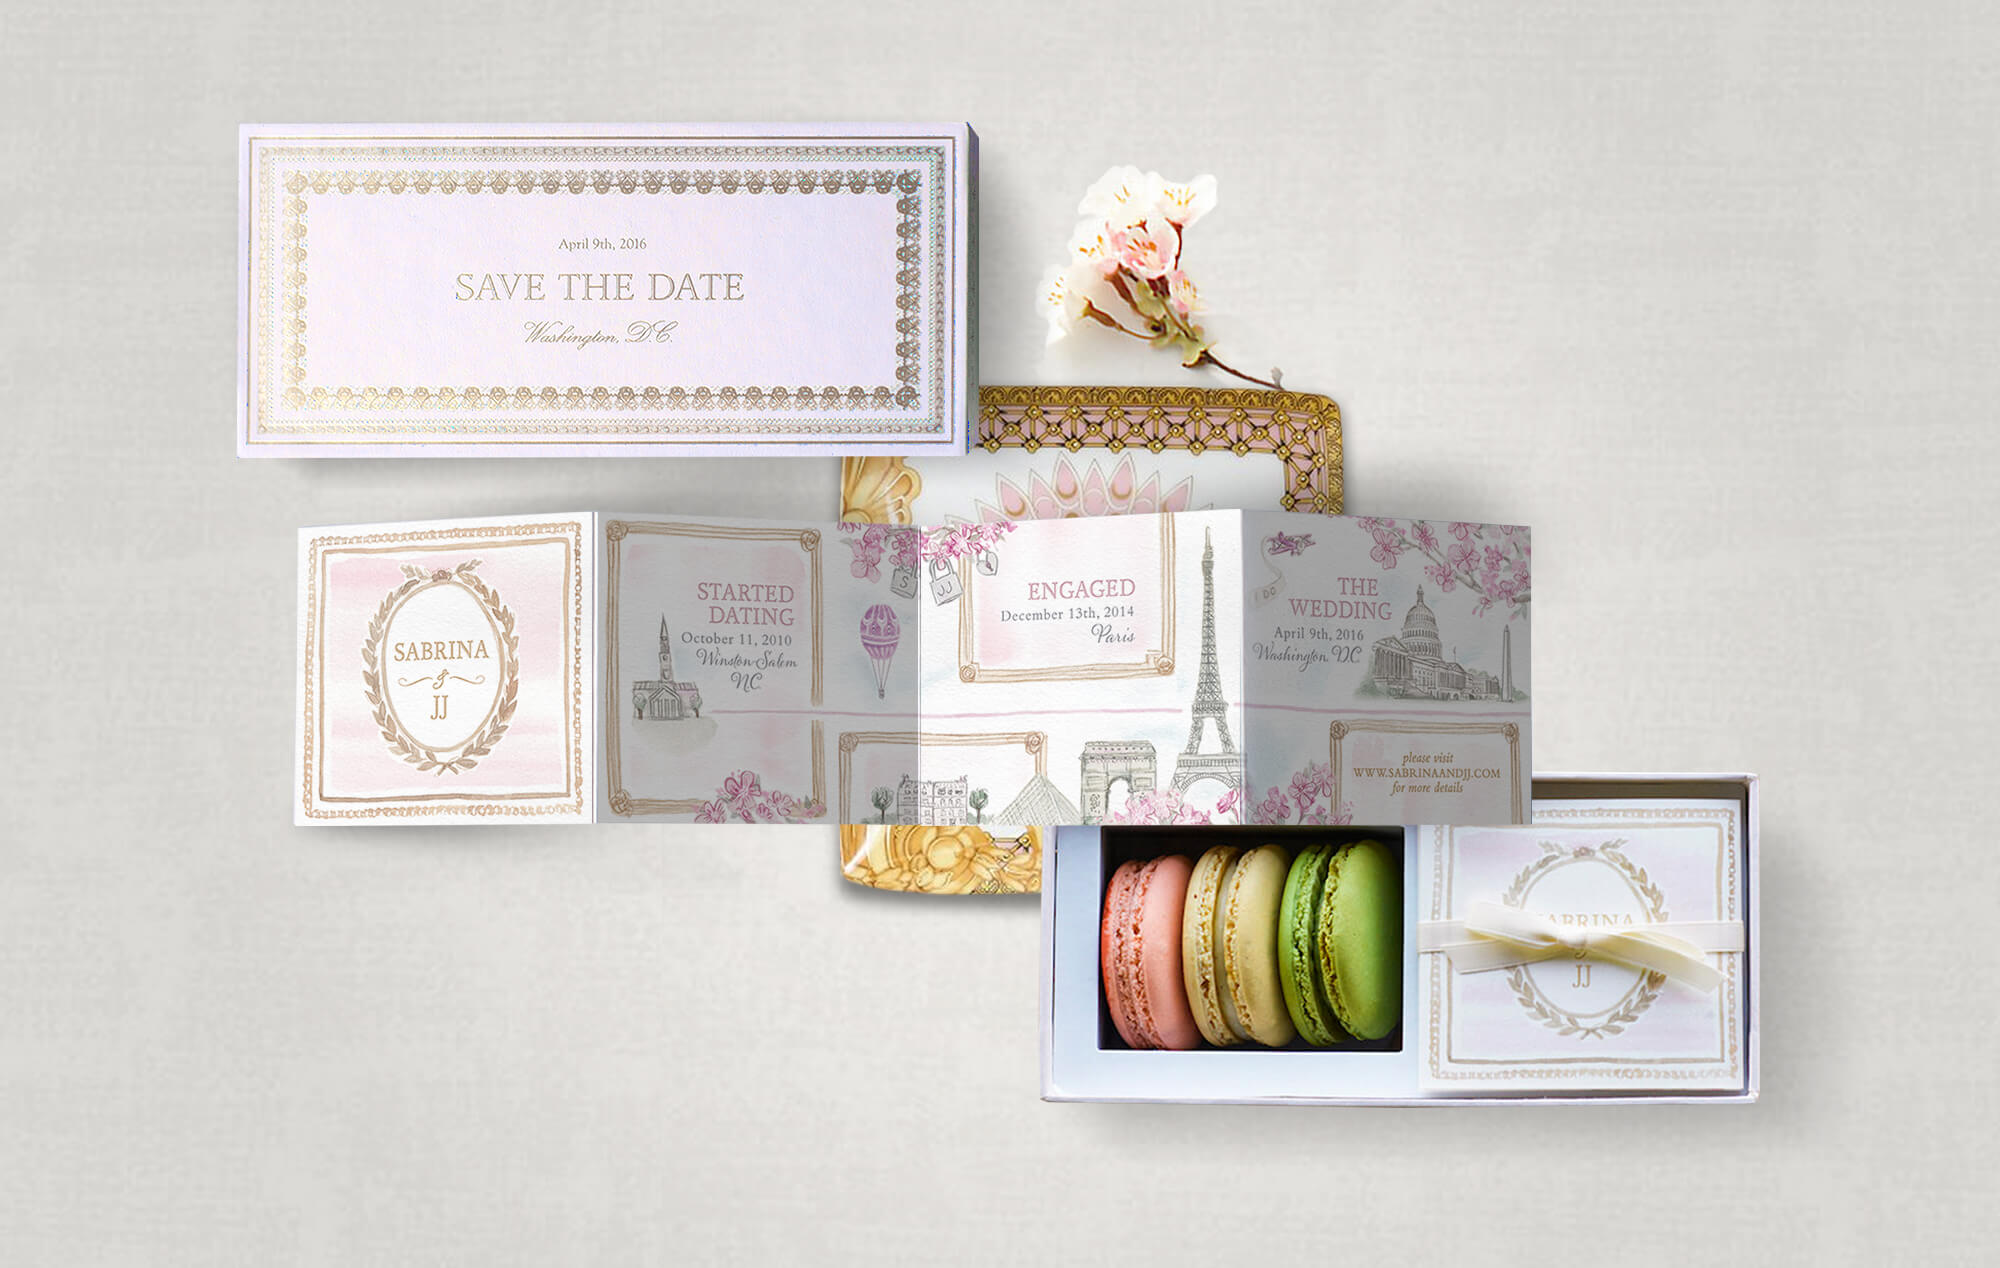 La Durée inspired macaron box save the date